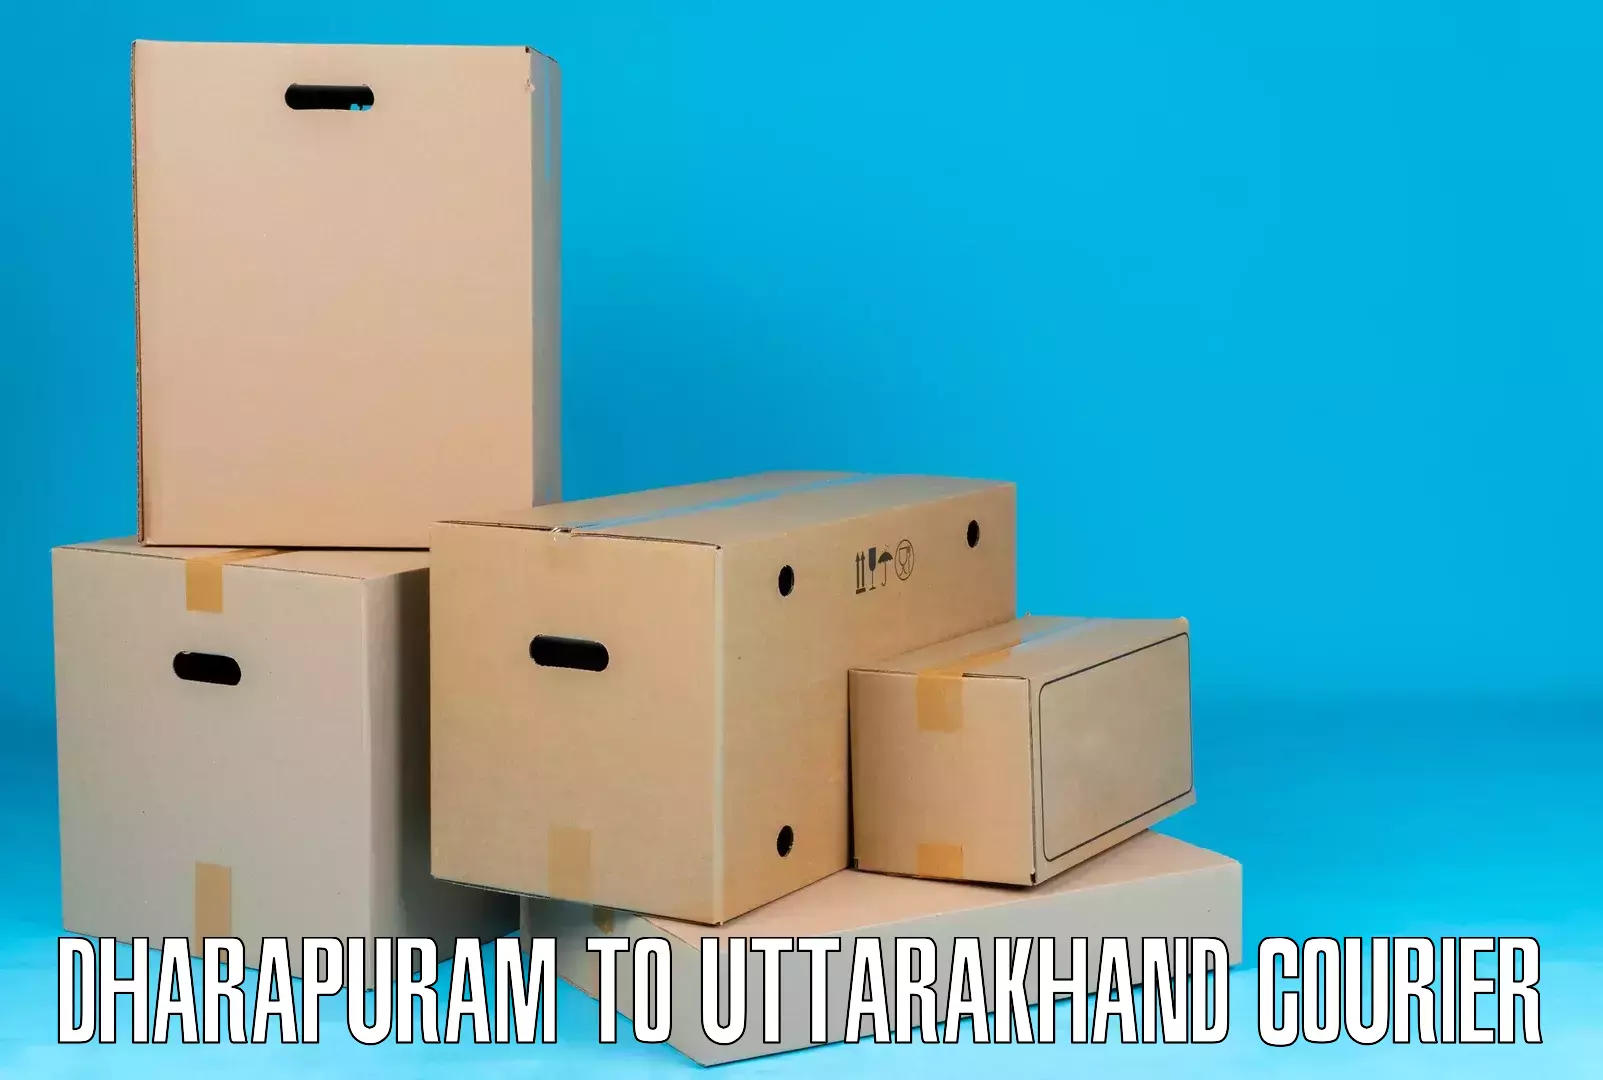 Nationwide courier service Dharapuram to Kashipur